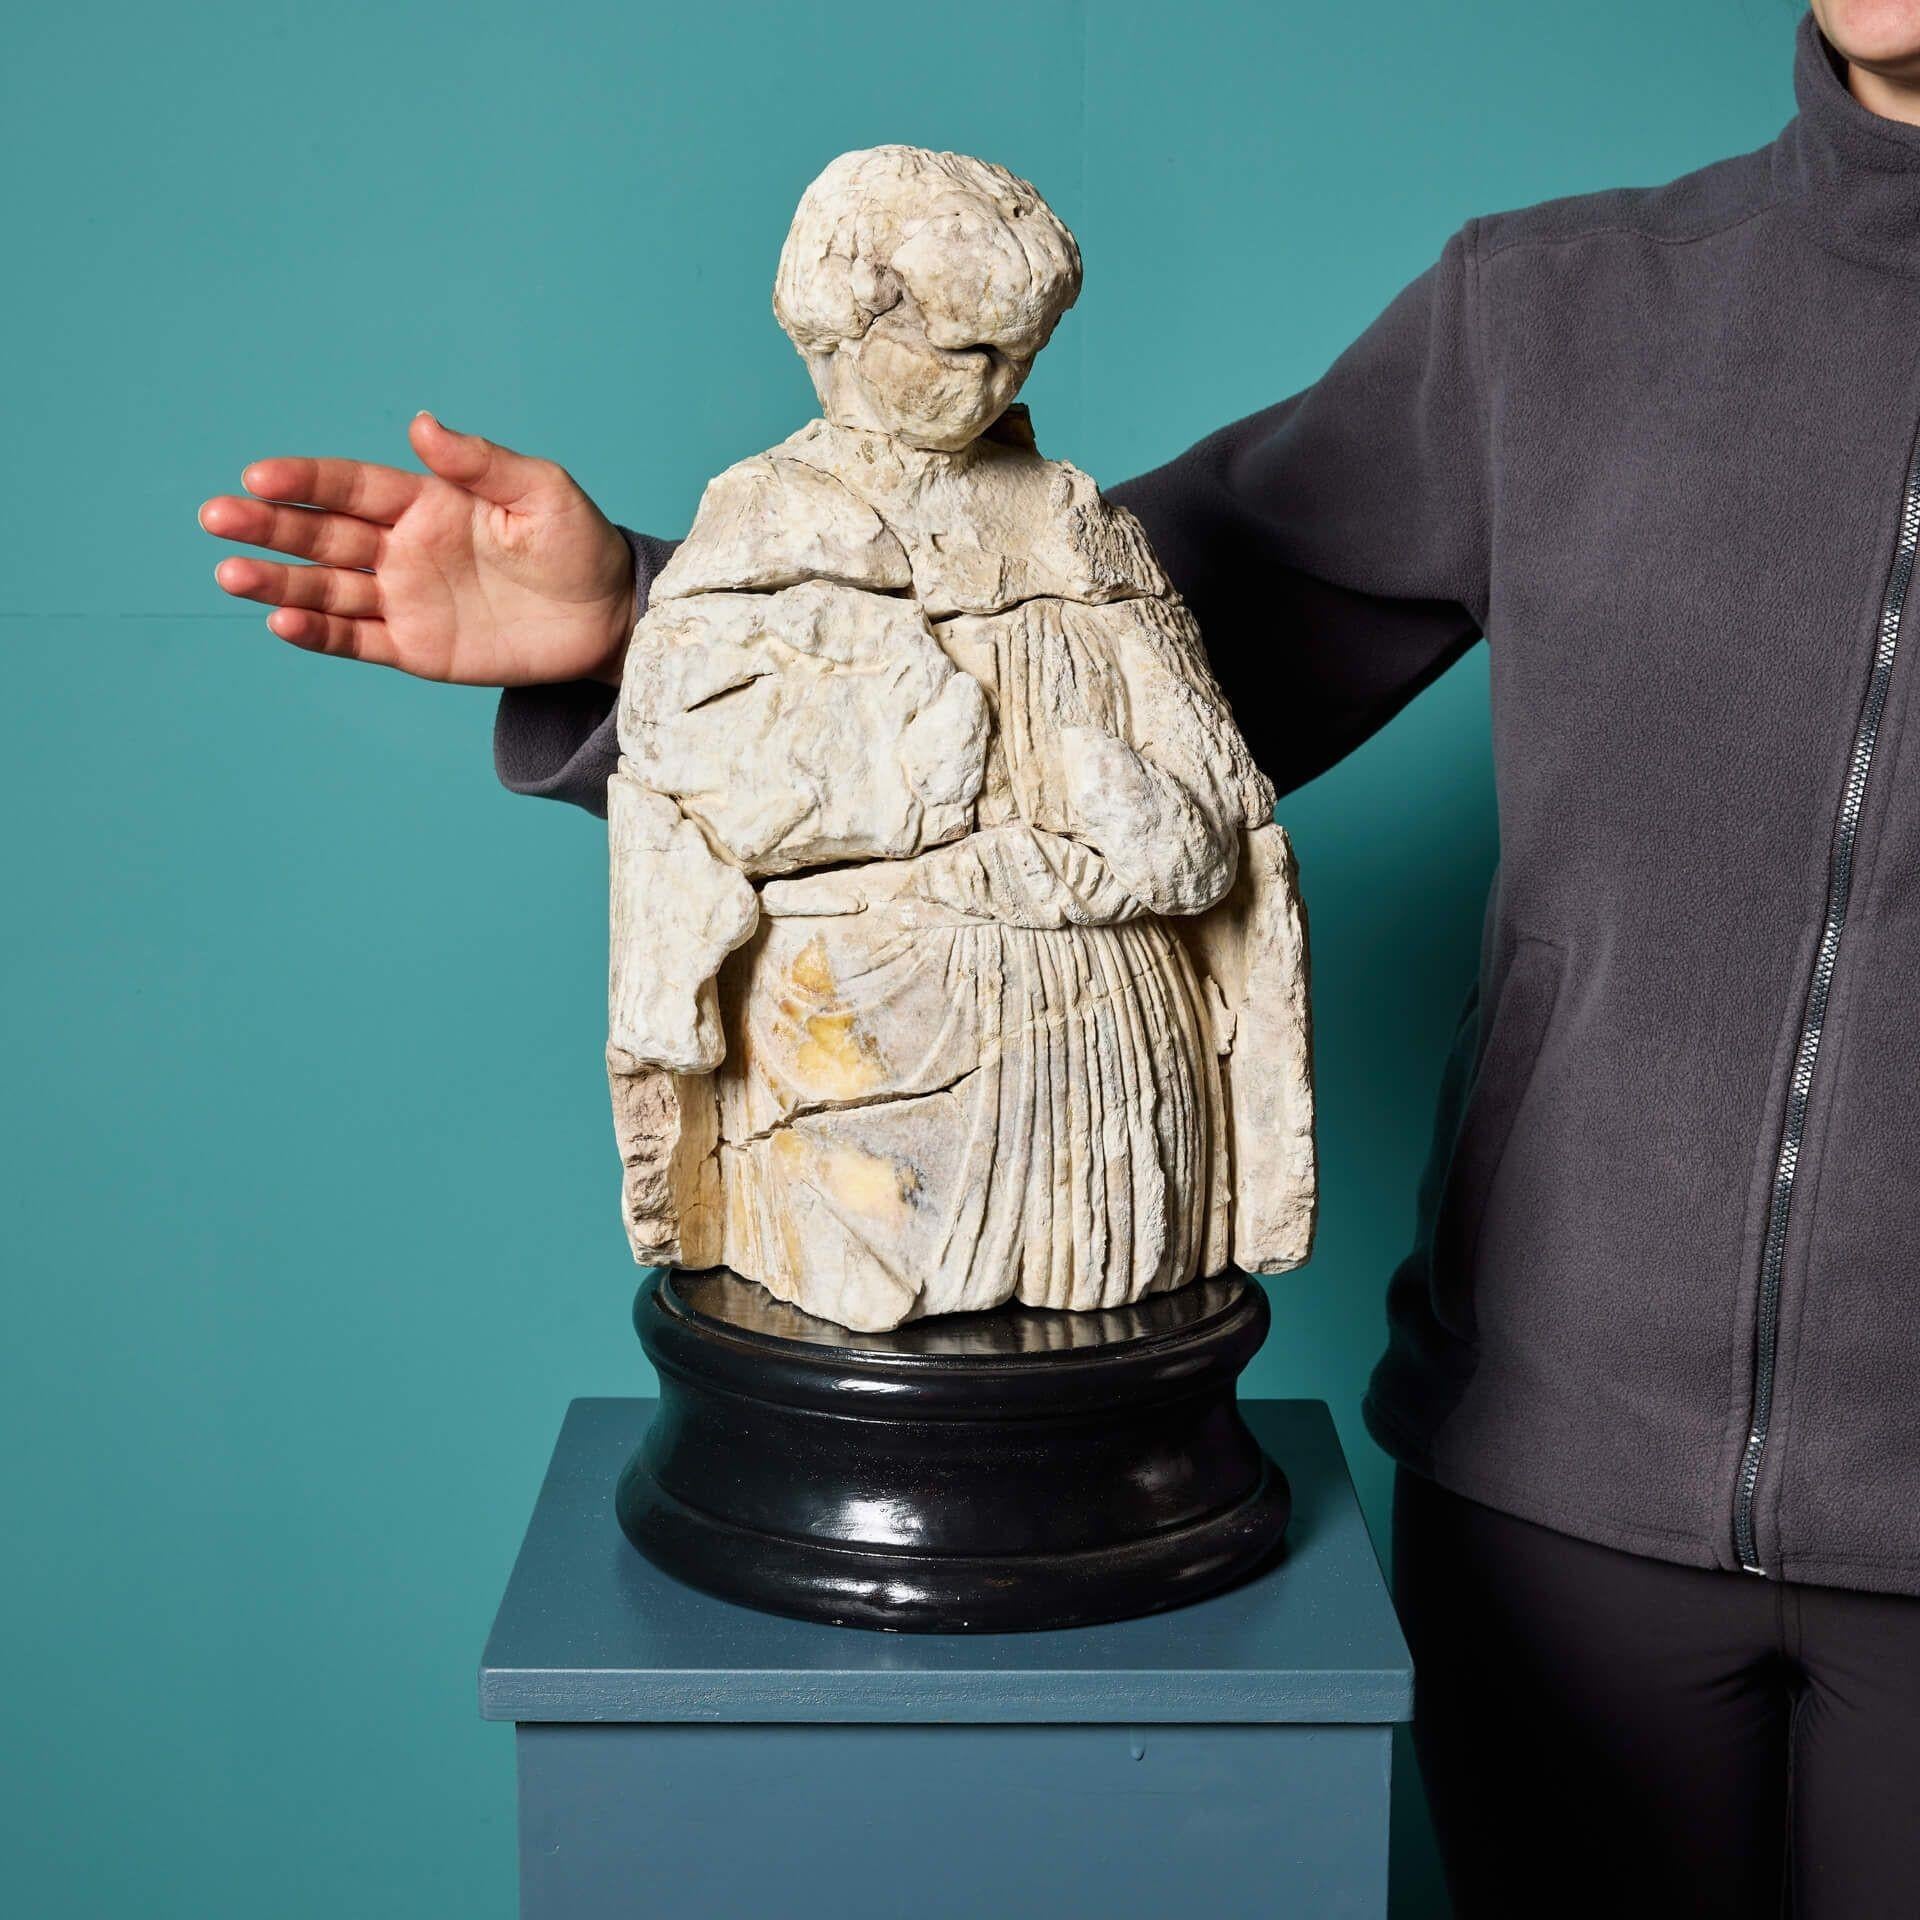 A medieval English alabaster statue, possibly dating as far back as the late 14th / early 15th century, mounted on one of our exclusive large display plinths. Well weathered over the centuries, this 600-year-old statue depicts a medieval cloaked